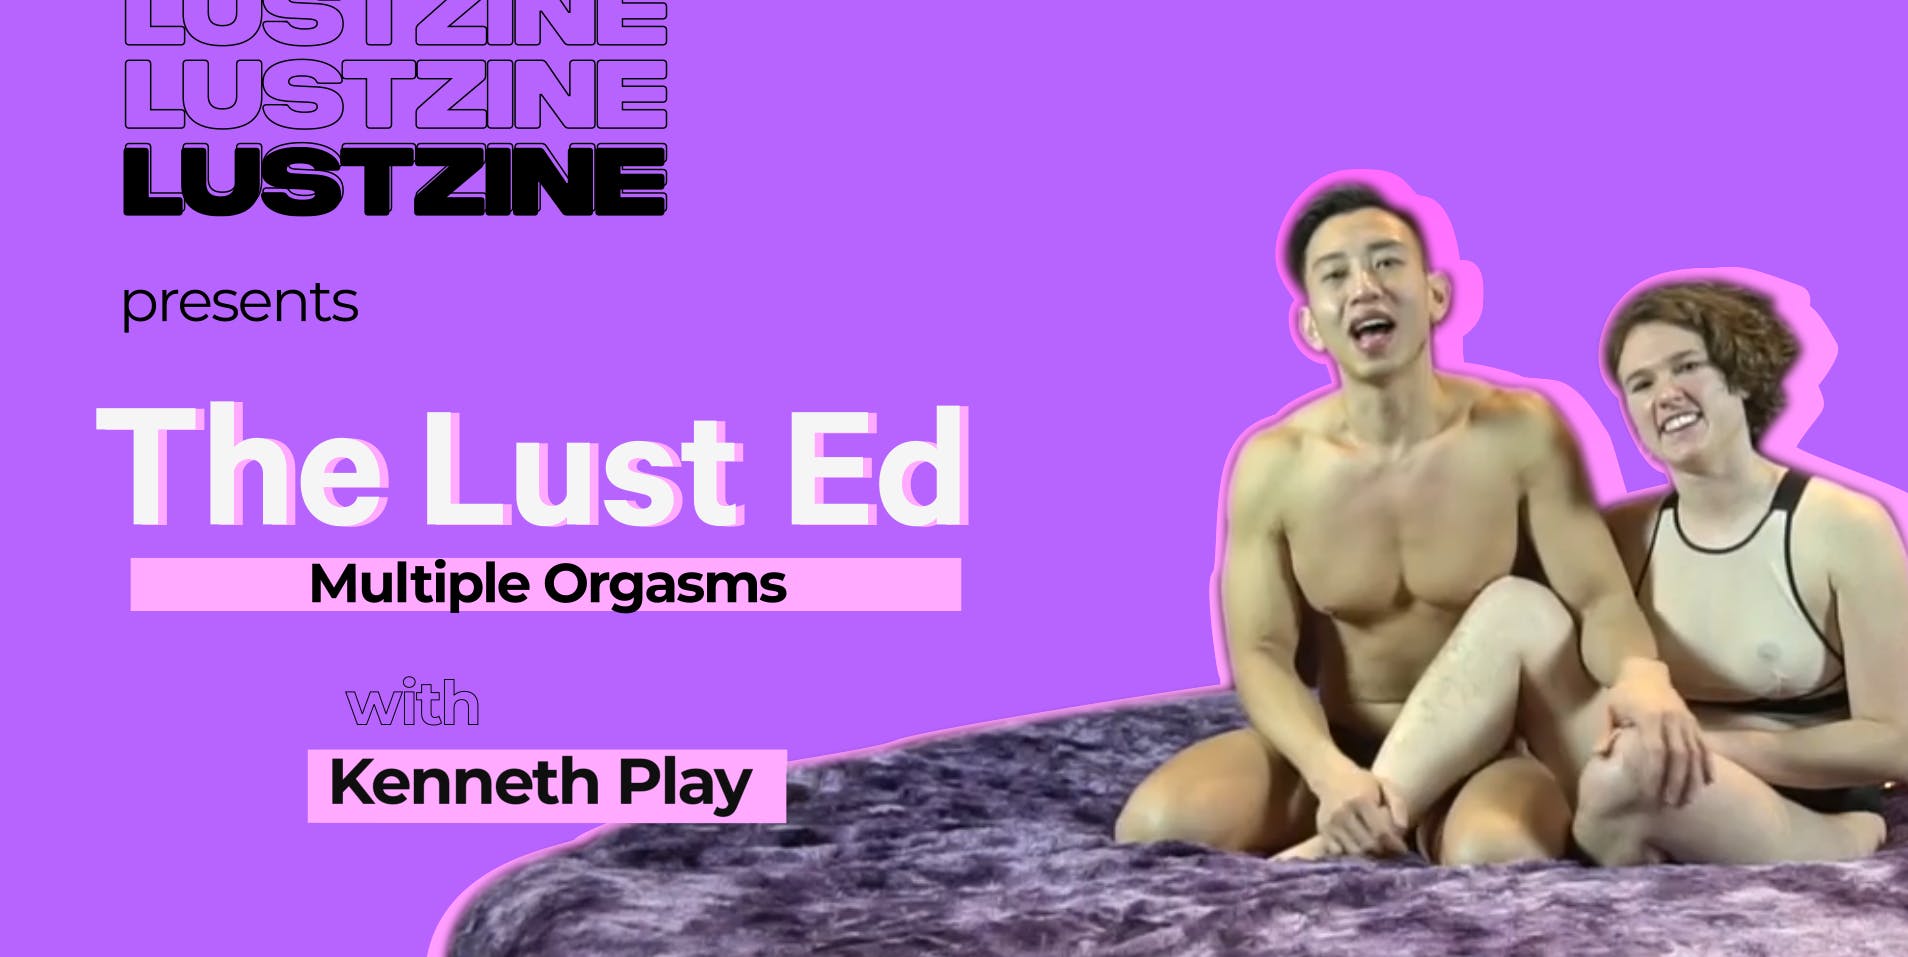 Article header video: How to Have Multiple Orgasms with Kenneth Play